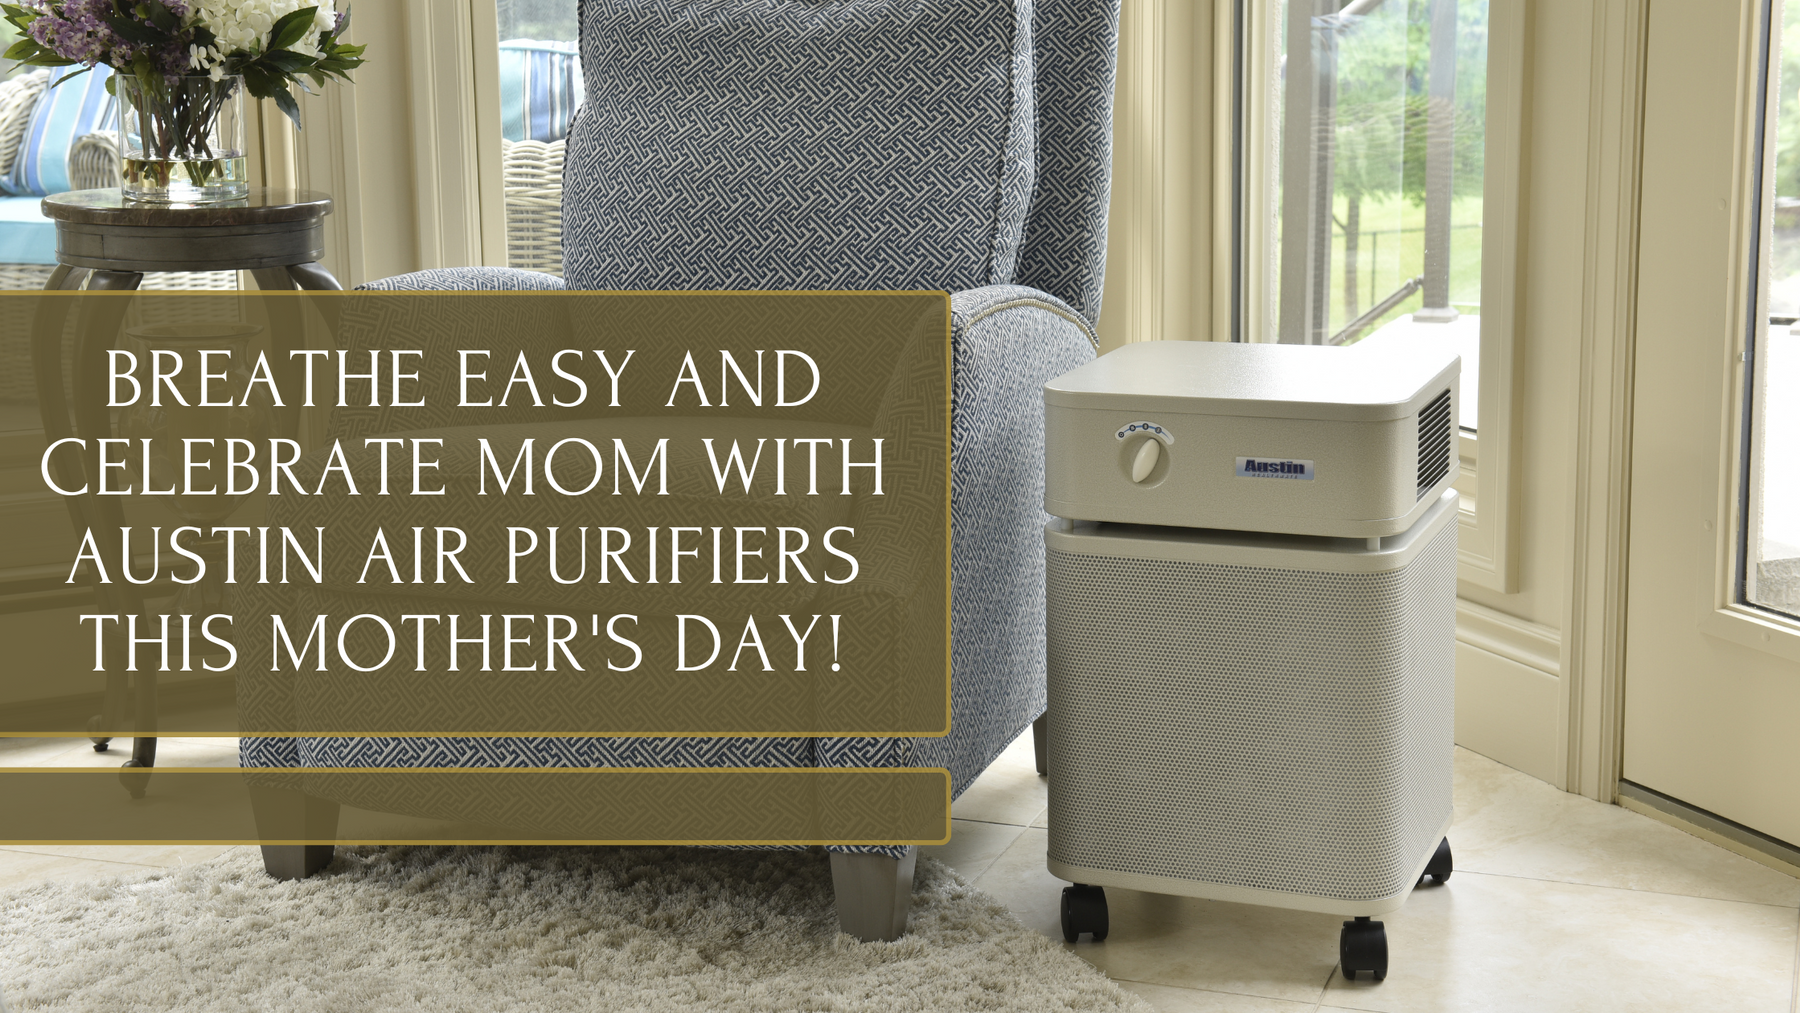 Breathe Easy and Celebrate Mom with Austin Air Purifiers this Mother's Day!